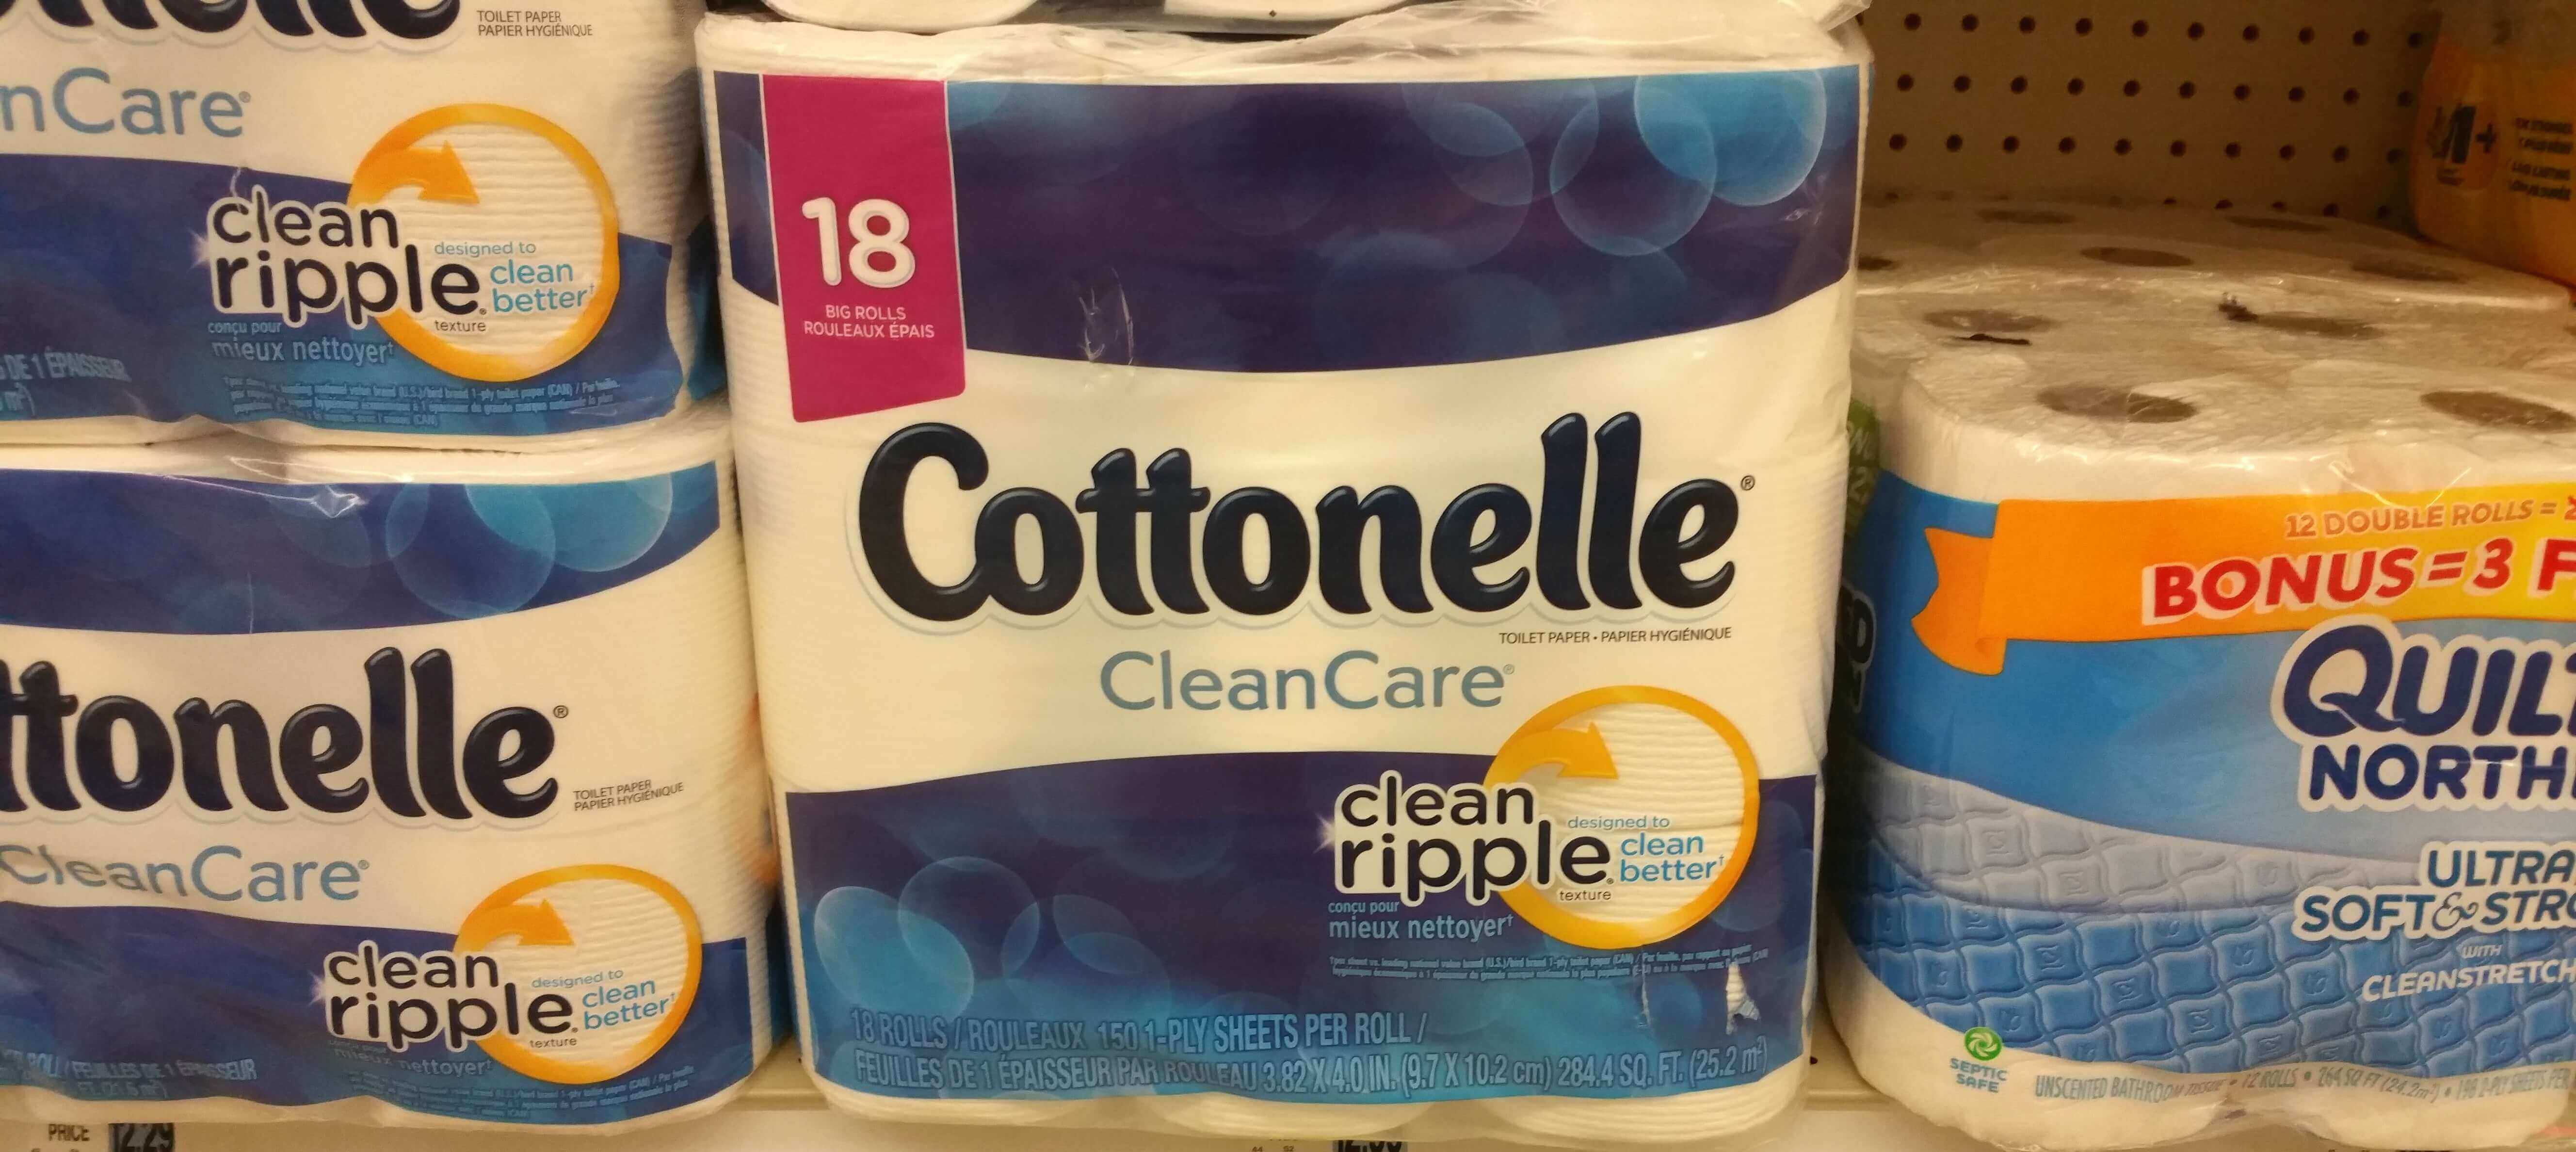 hurry-cottonelle-bath-tissue-just-0-22-per-roll-at-rite-aid-more